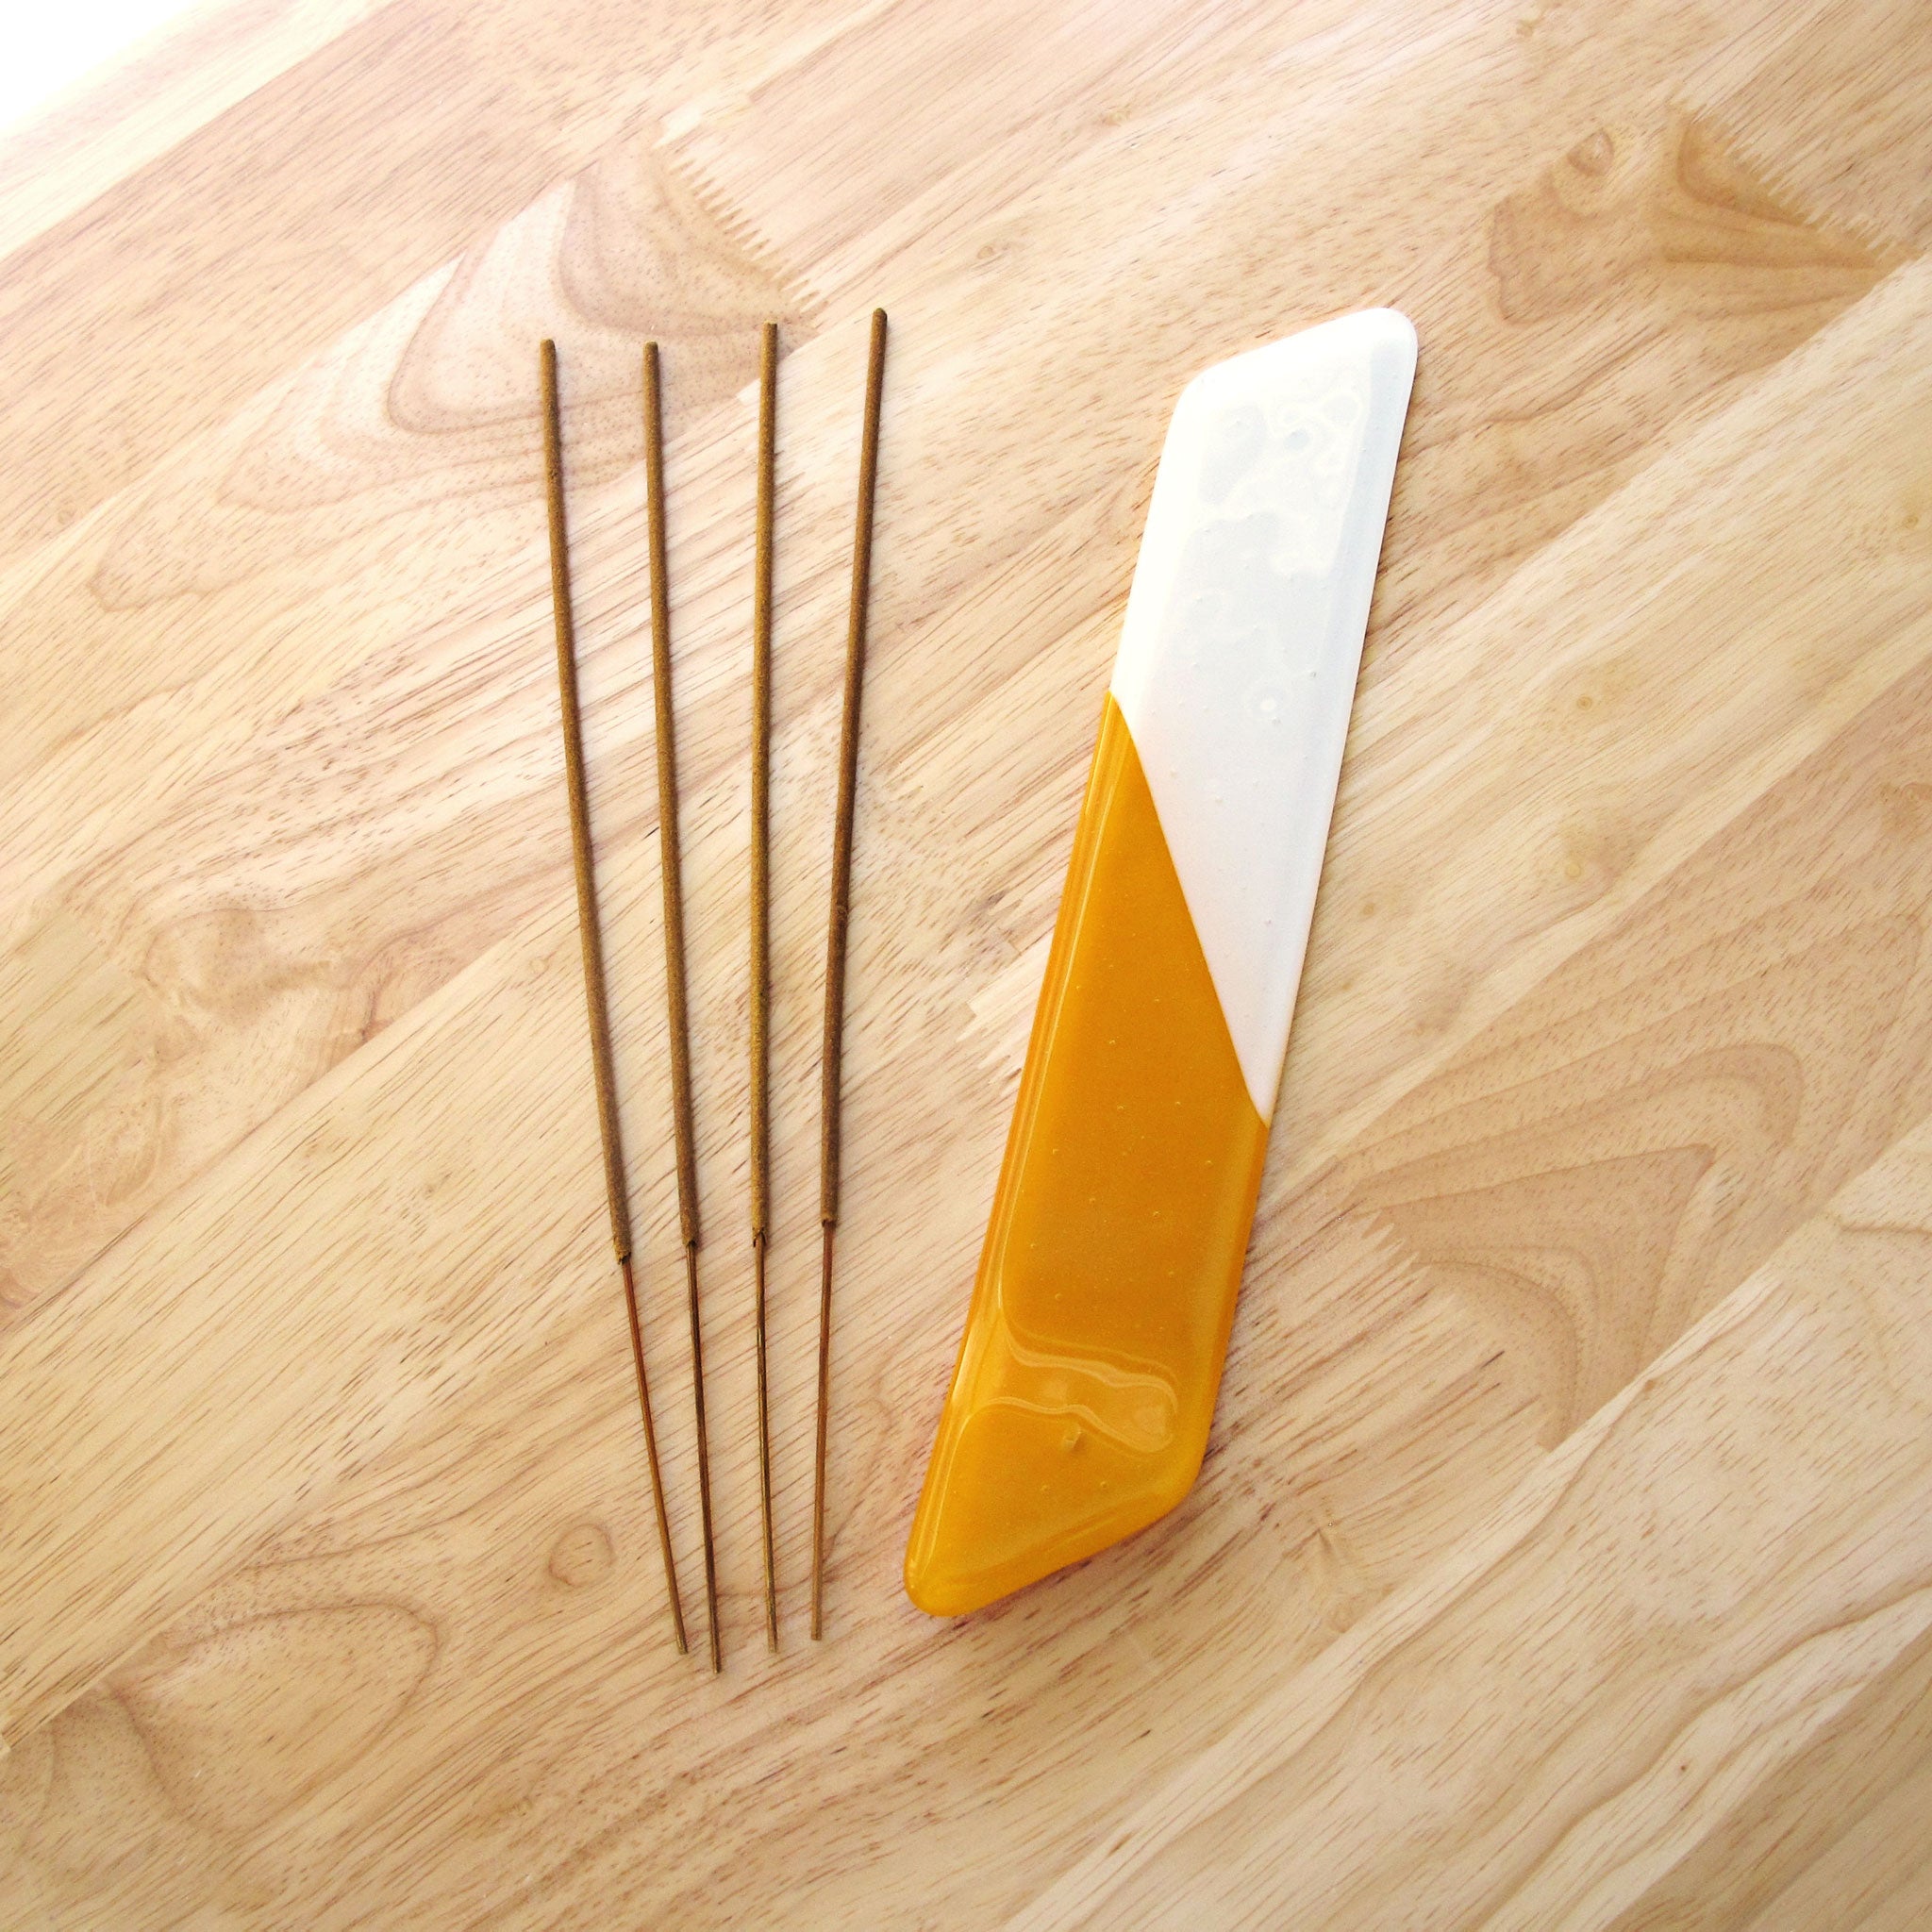 Katie Kismet yellow and white incense burner with four sticks of incense (flat view)